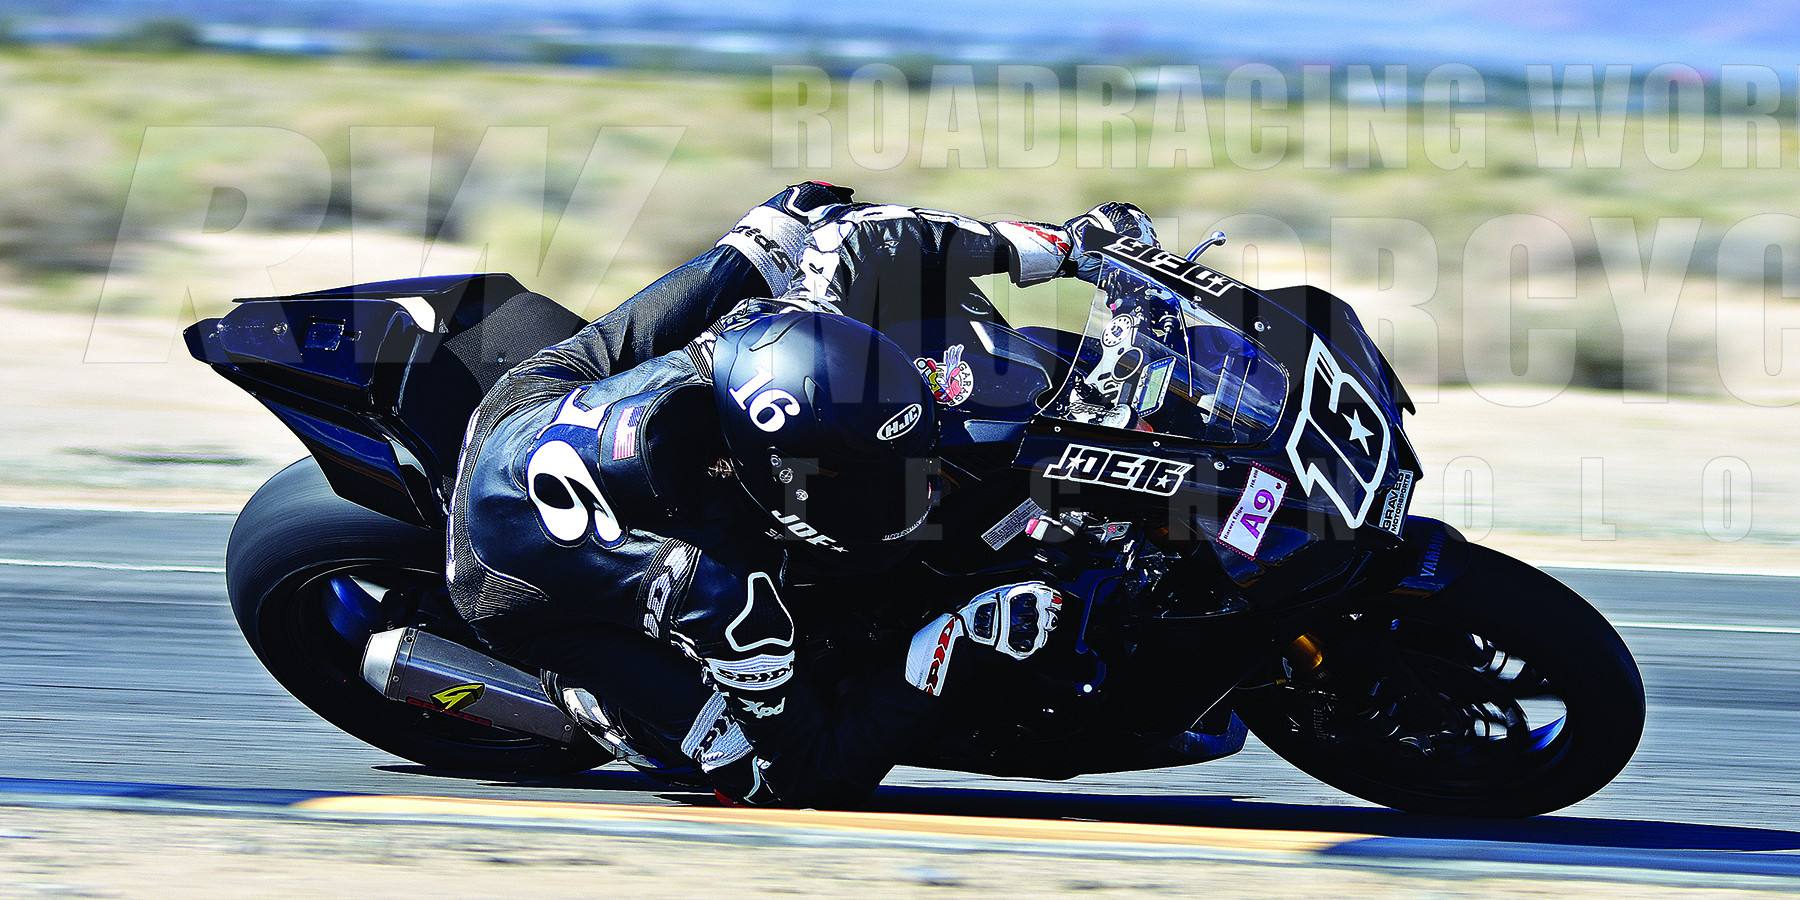 Joe Roberts at Chuckwalla Valley Raceway on the Yamaha YZF-R1 Superbike he built to get used to running on Pirelli tires during the off -season. 